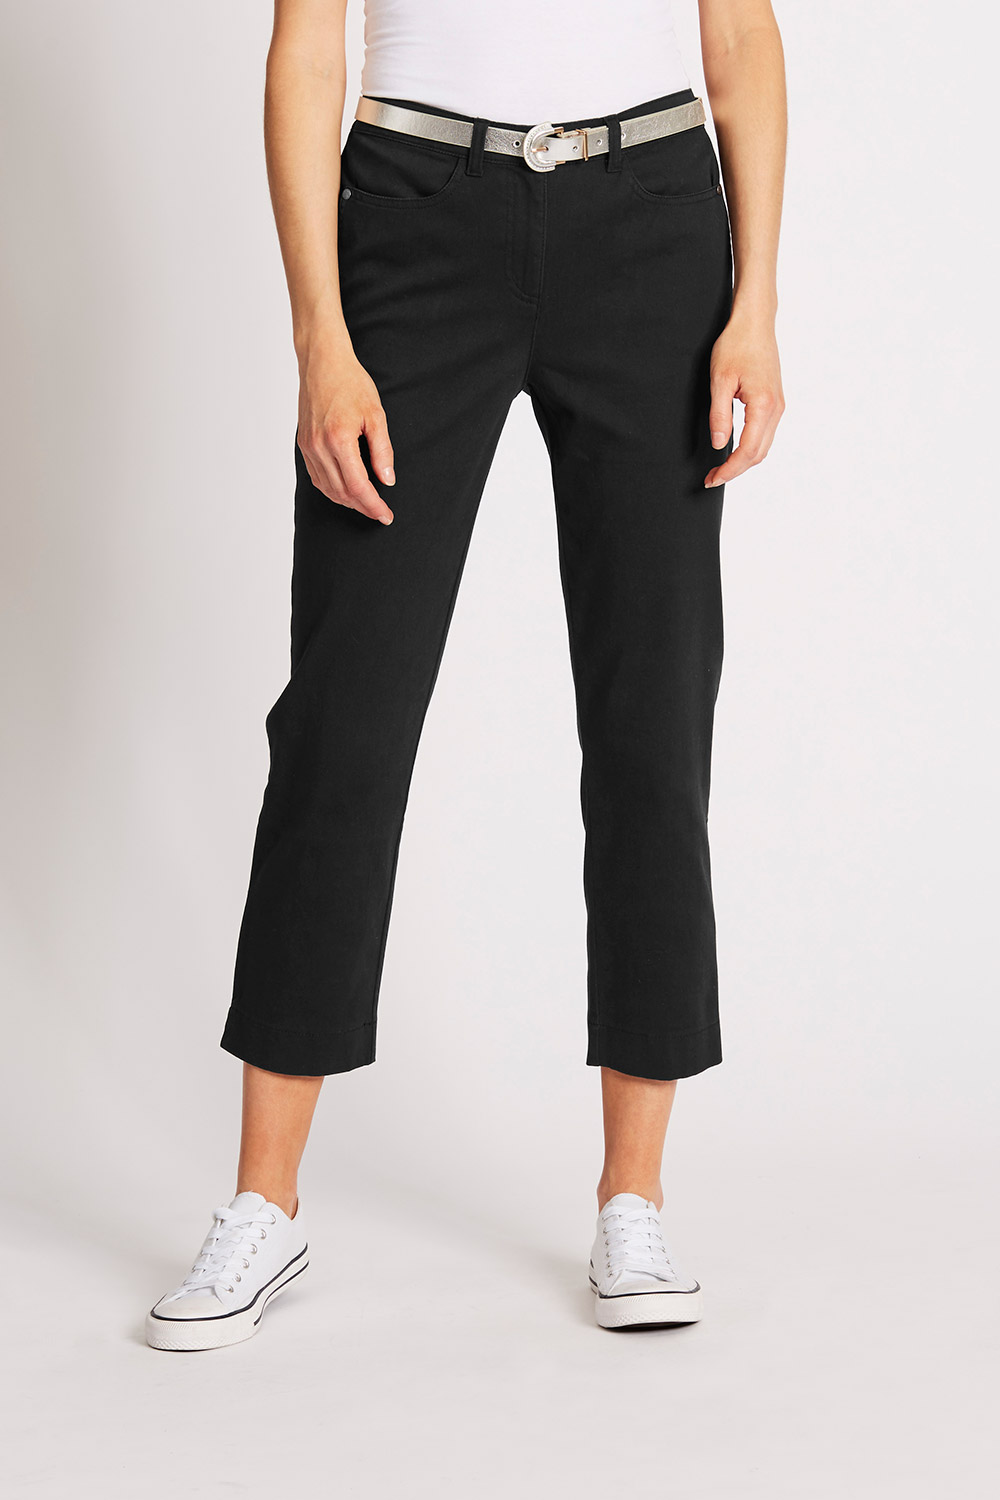 Cotton Stretch Cropped Trousers - Crop trouser - Damart.co.uk